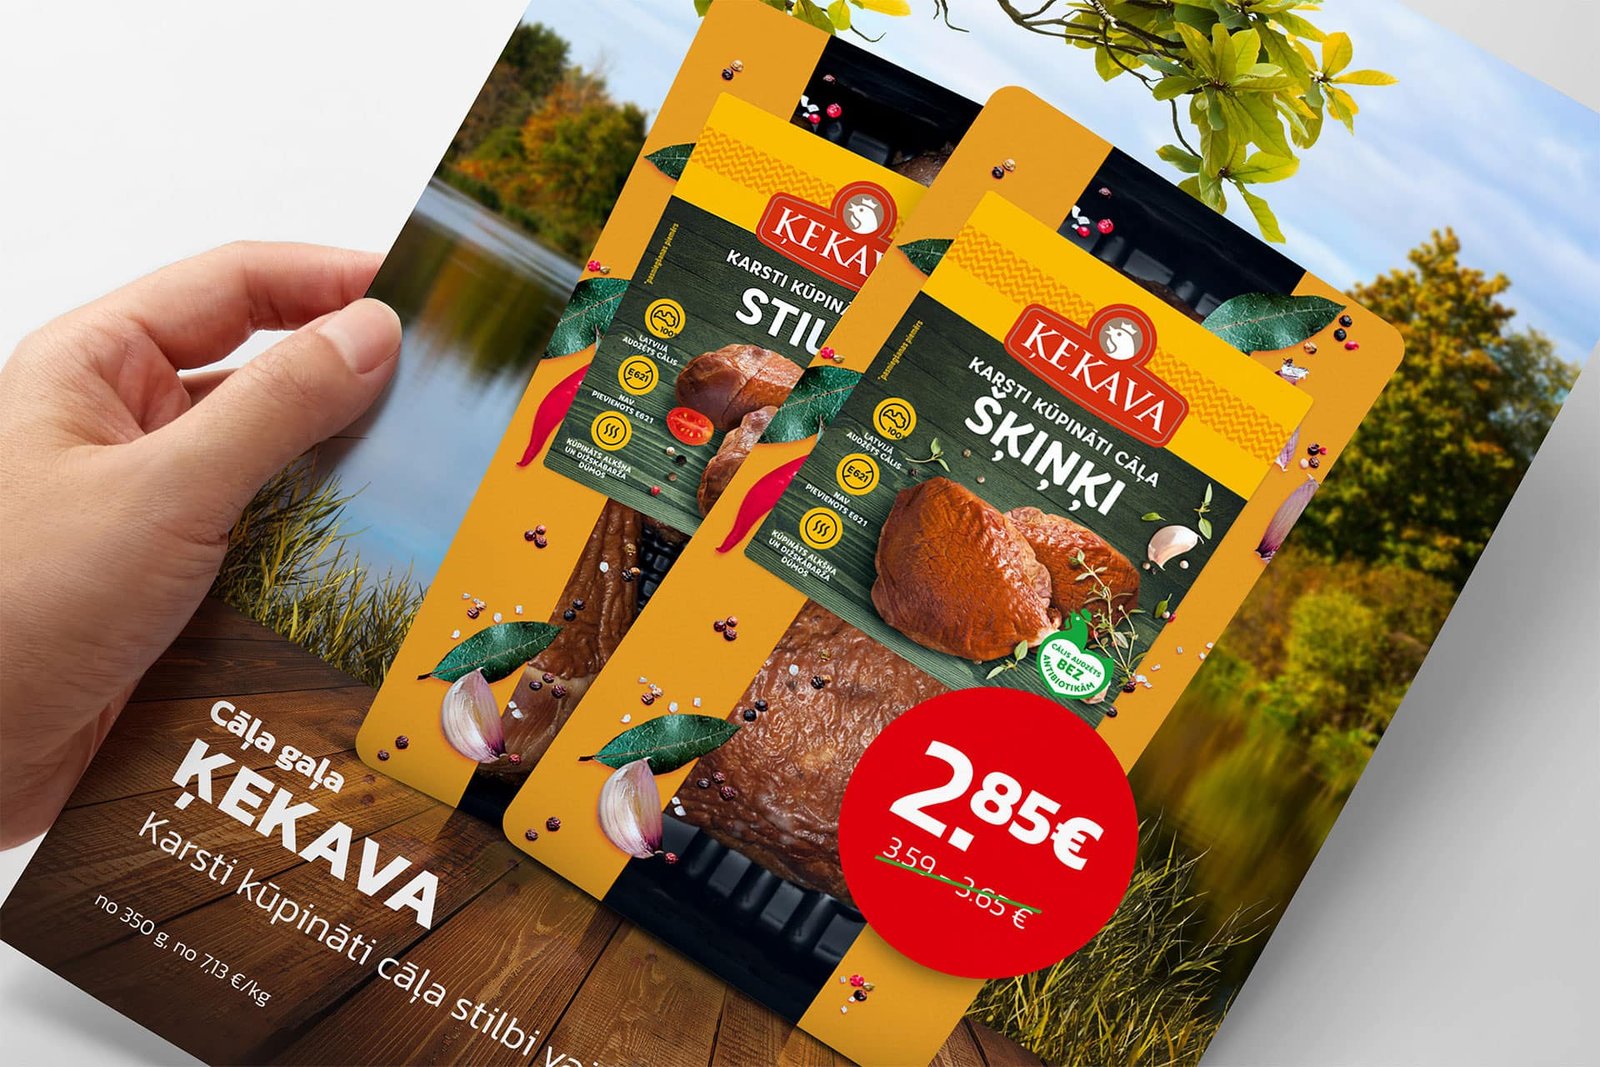 Captivating autumn-themed advertising materials for retail stores